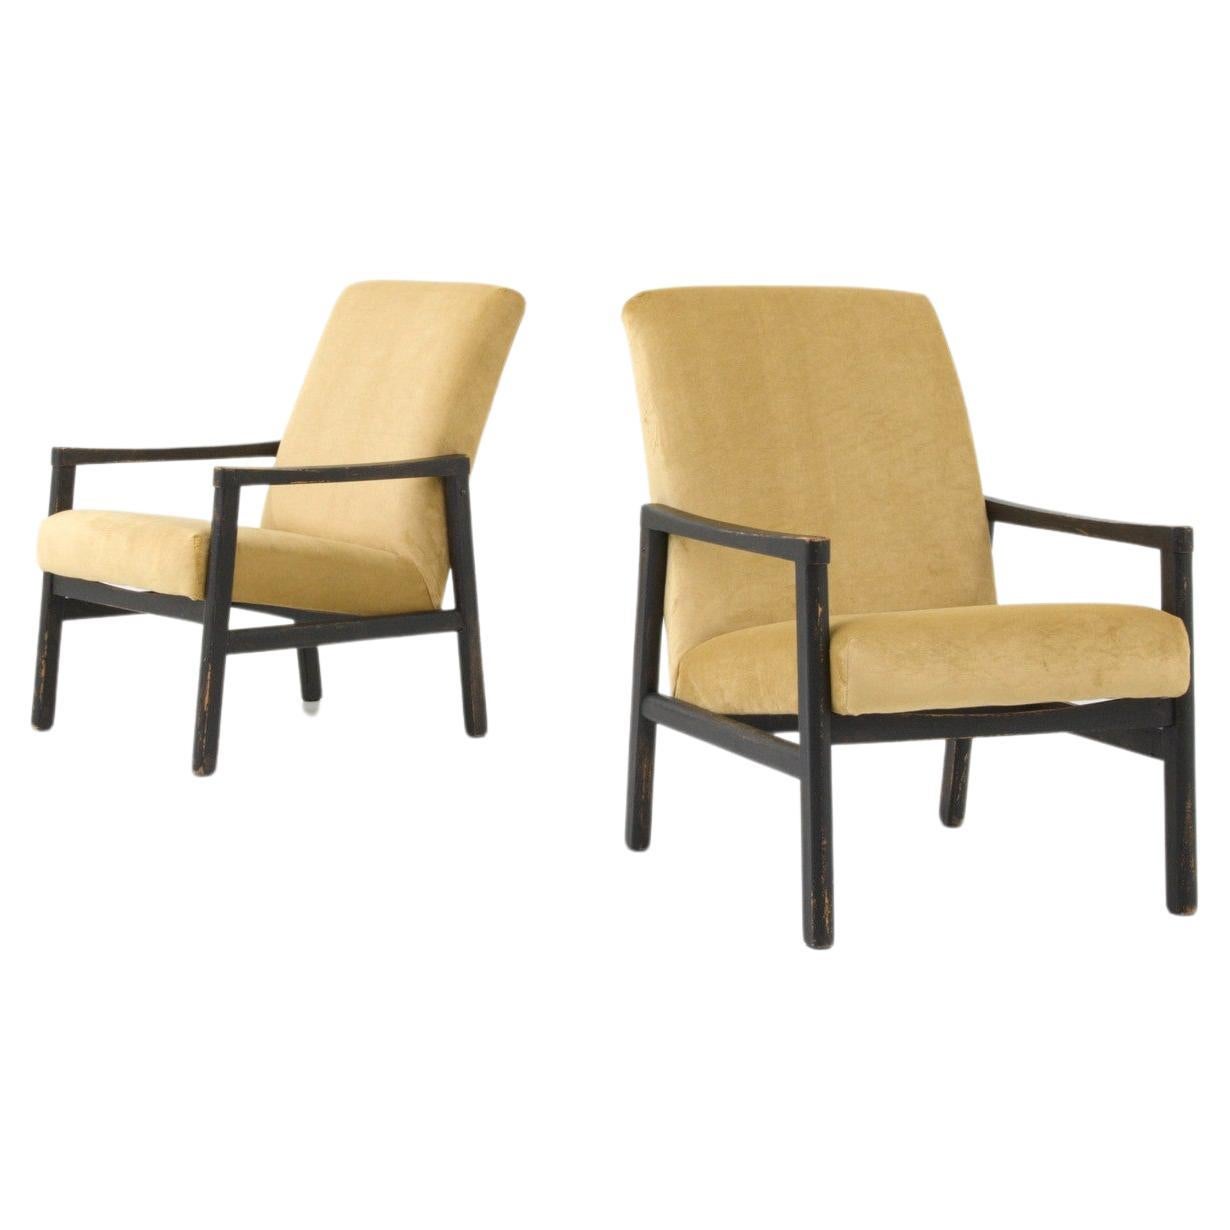 1960s Czech Upholstered Armchairs, a Pair For Sale